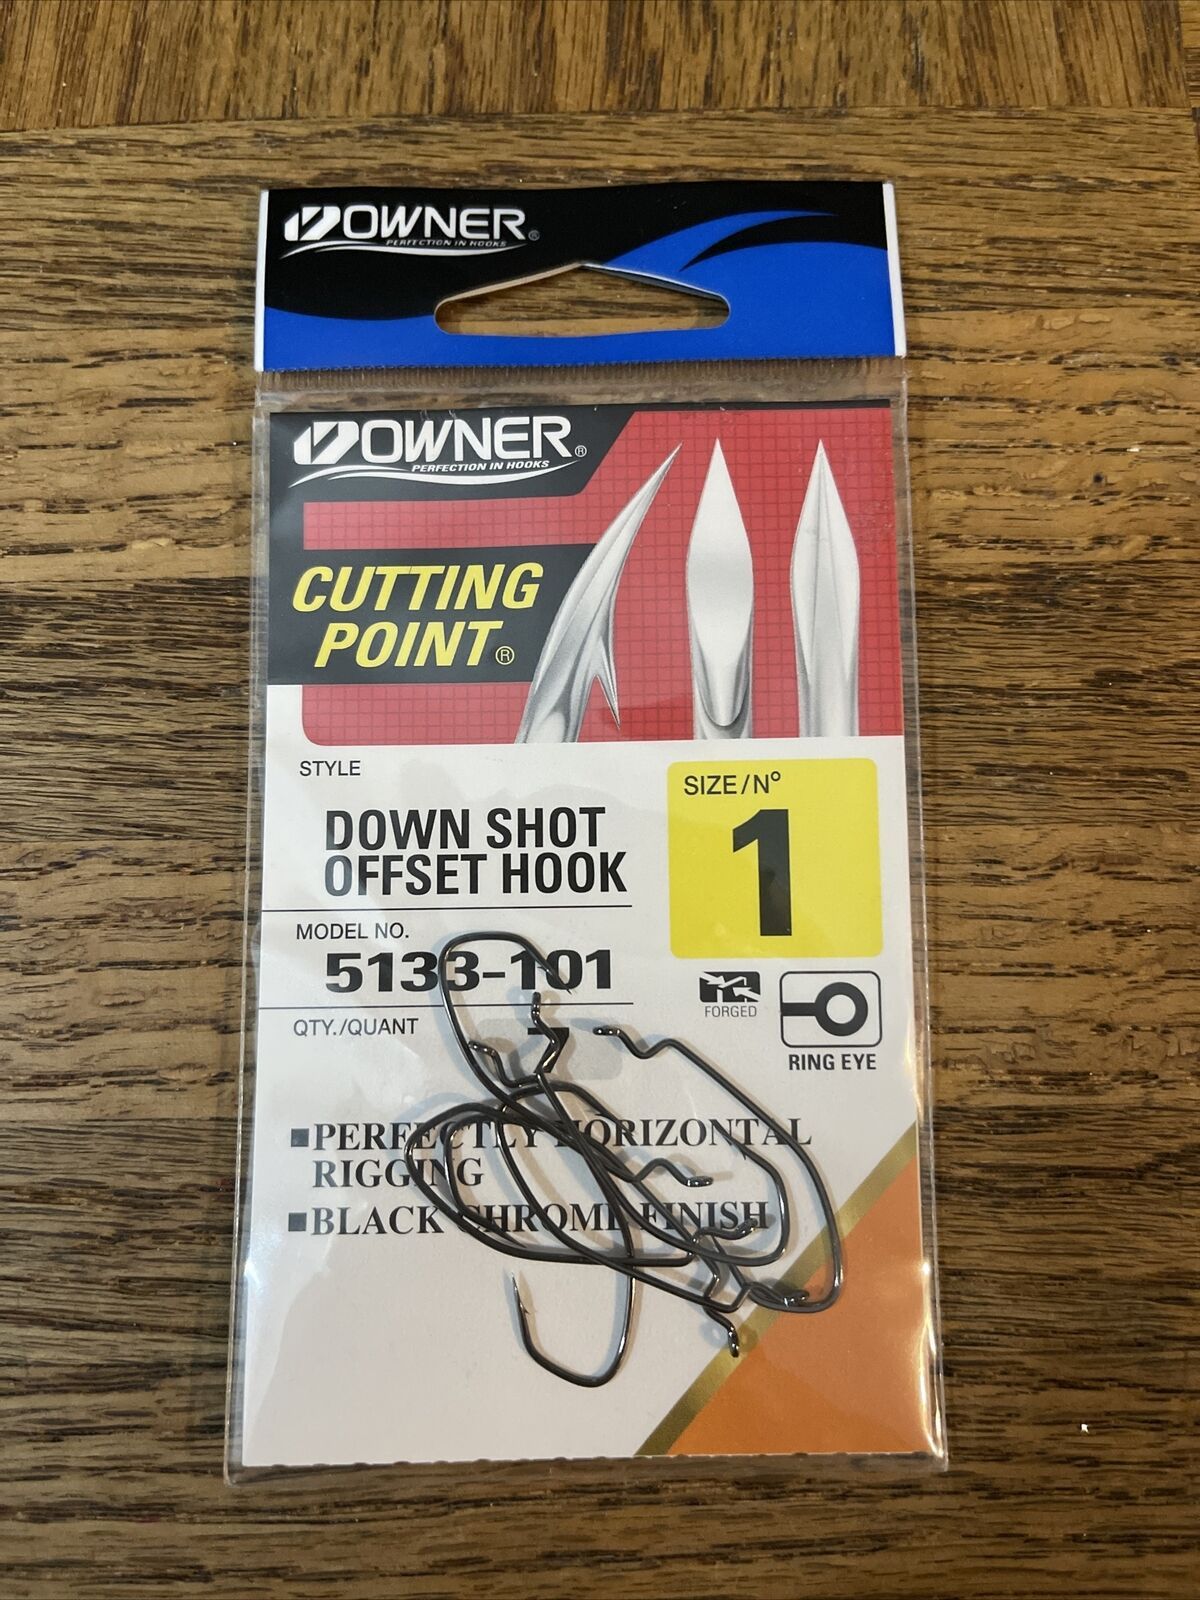 Owner cutting point down shot offset hook size 1